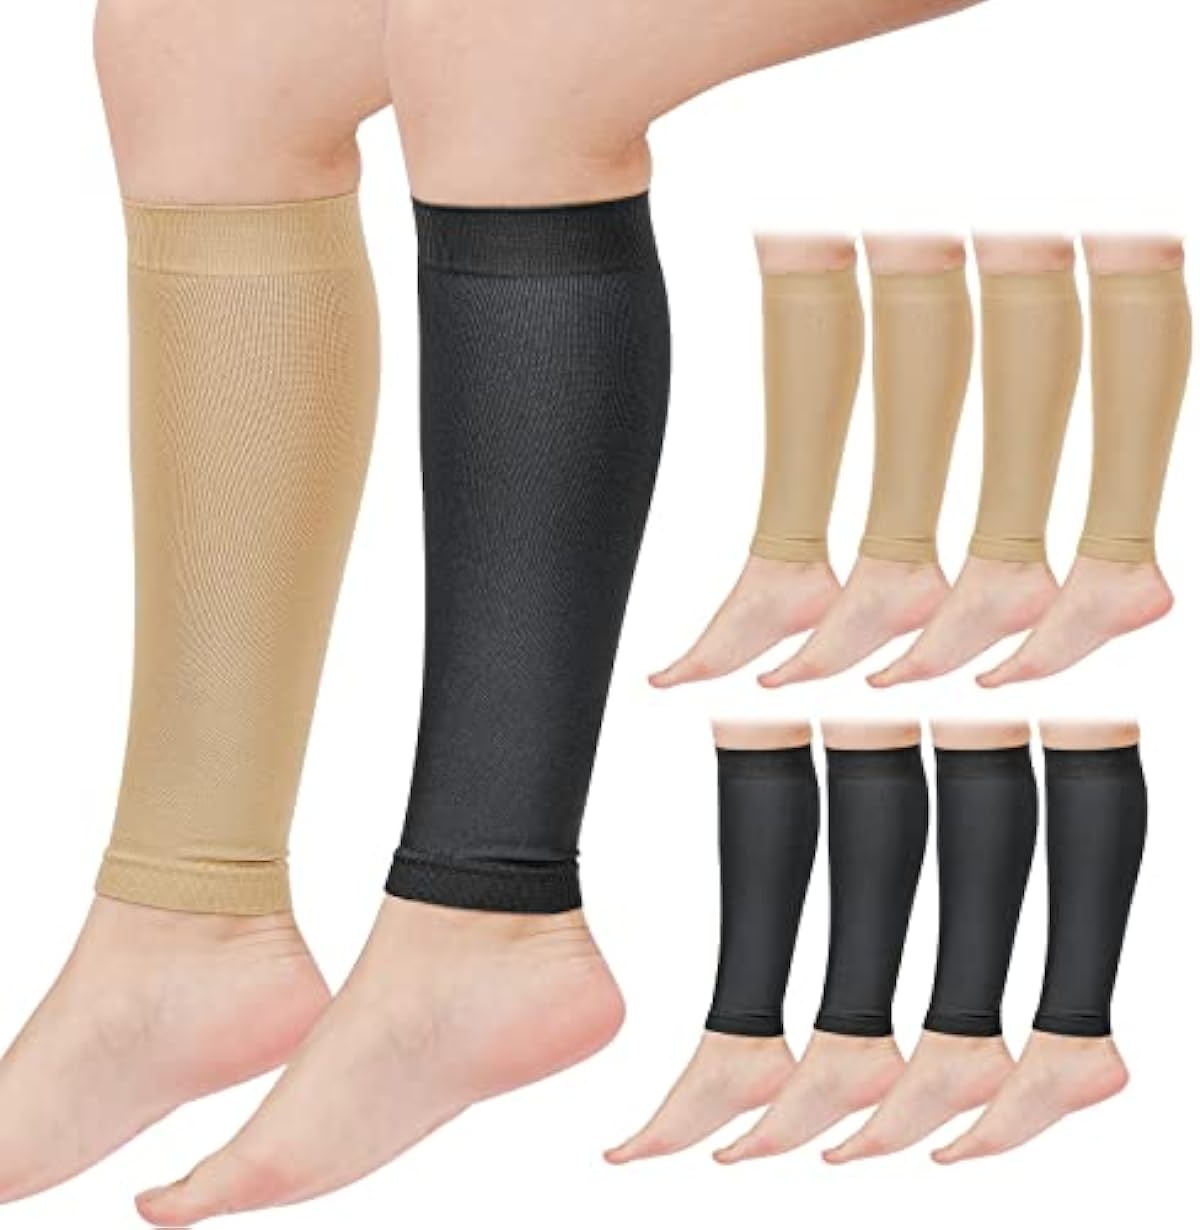 10 Pairs Calf Compression Sleeve Footless Compression Sock Football Leg Sleeve Calf and Shin Support for Men Women Youth Running Cycling Football Basketball Sports, Black and Beige, Medium